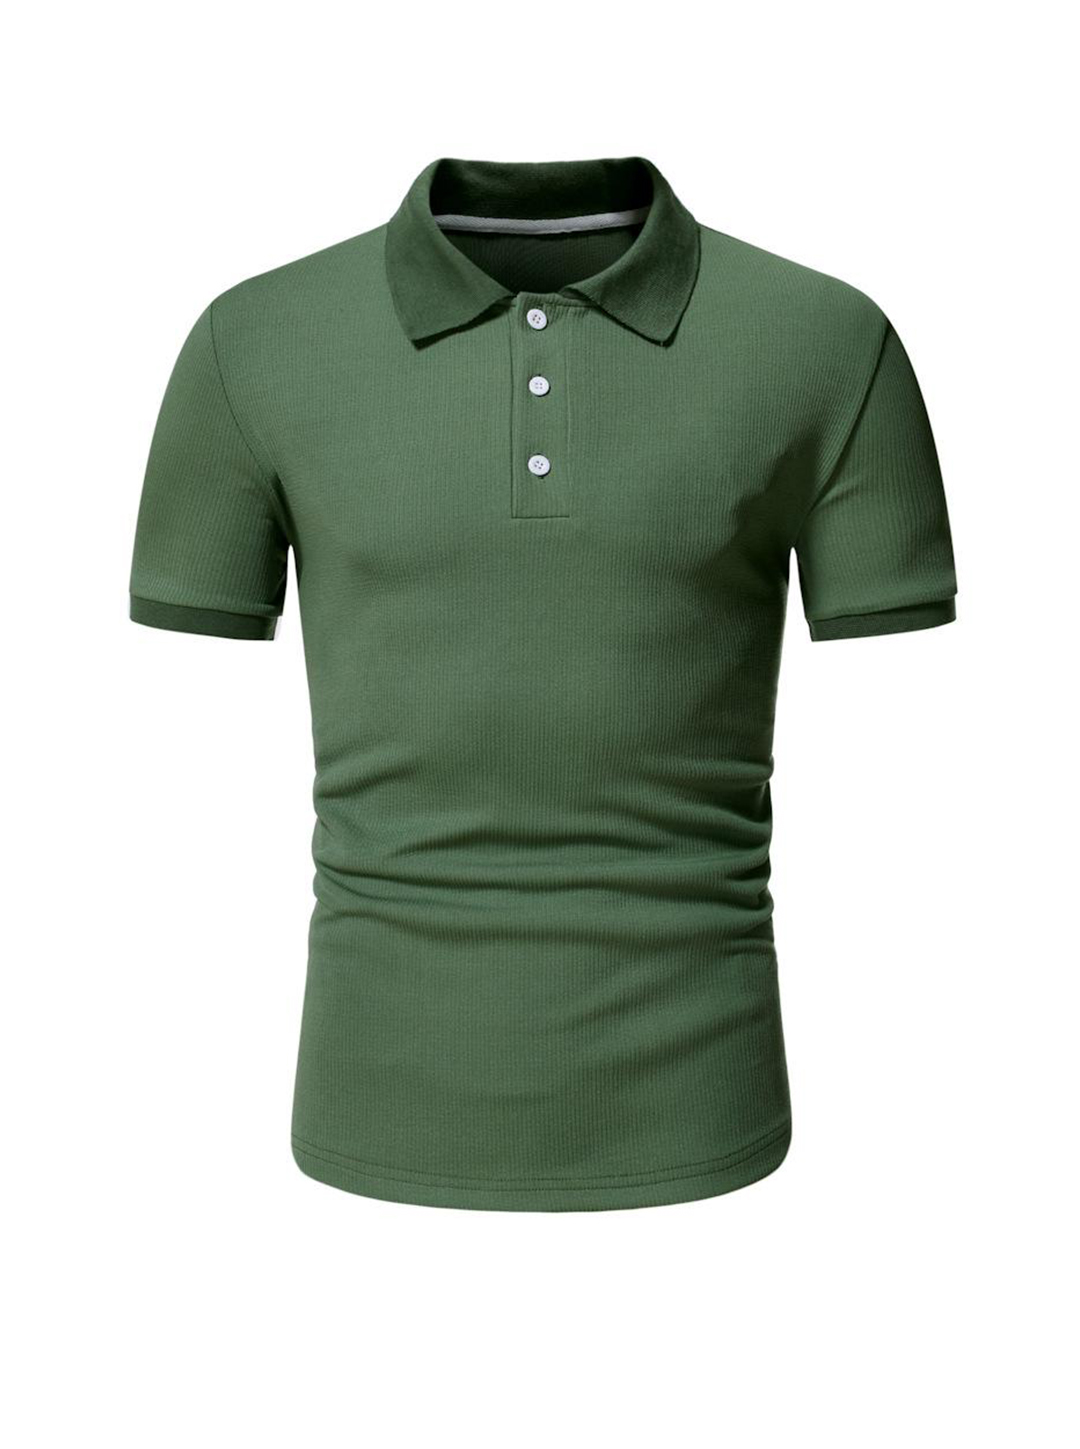 Larry Textured Fabric Solid Color Short-sleeved Polo T-shirt 